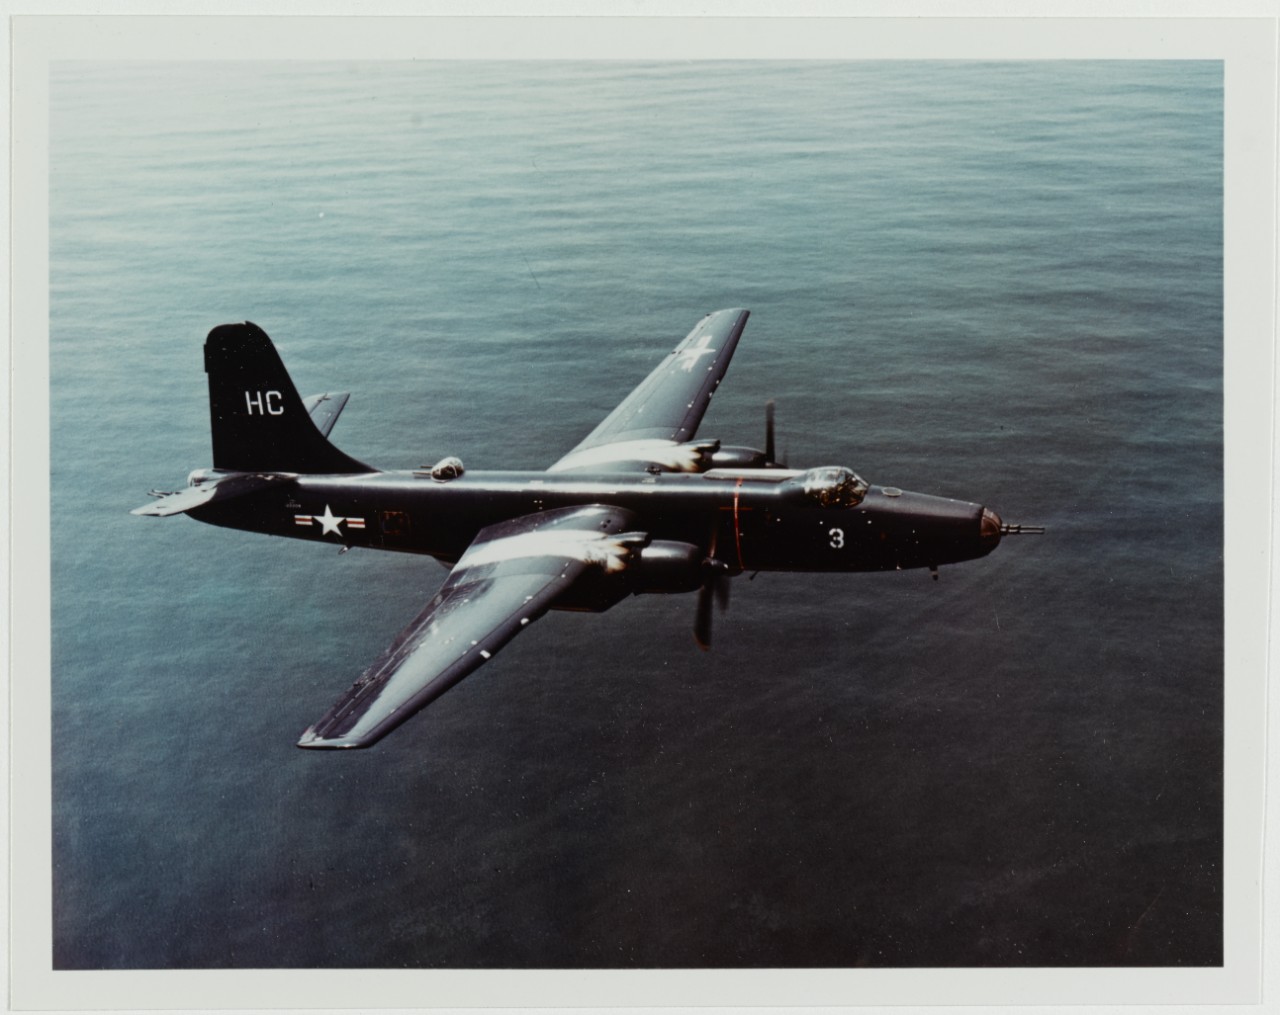 MARTIN P4M in flight over Patuxent River, Maryland, circa 1950s